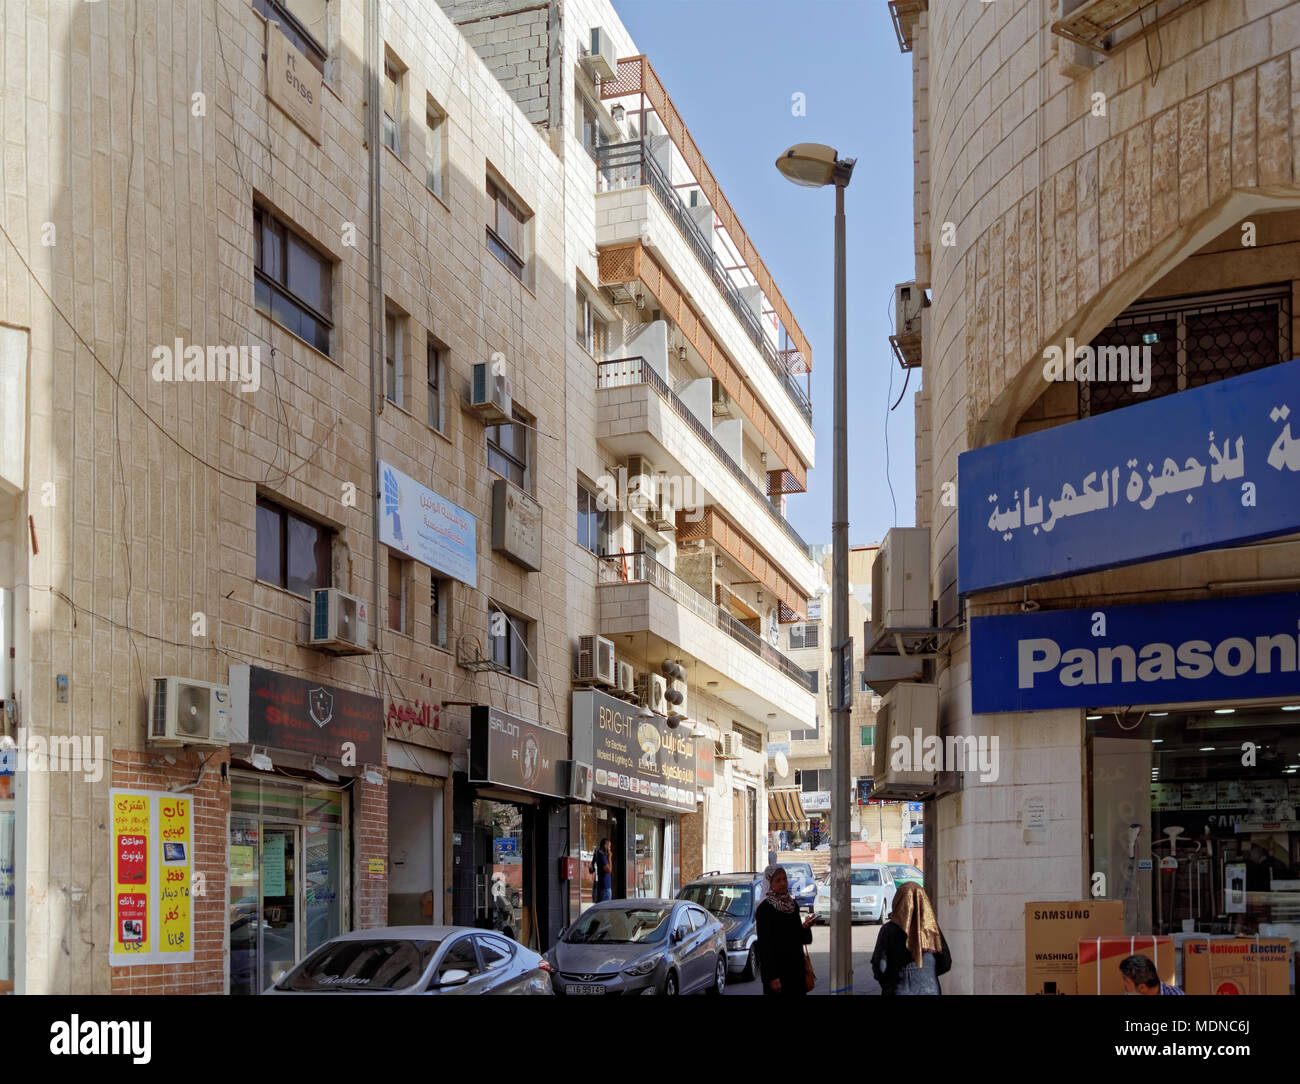 Aqaba, Jordan, March 7, 2018: Narrow shopping street with shops and apartments in a suburb of Aqaba at the Red Sea Stock Photo